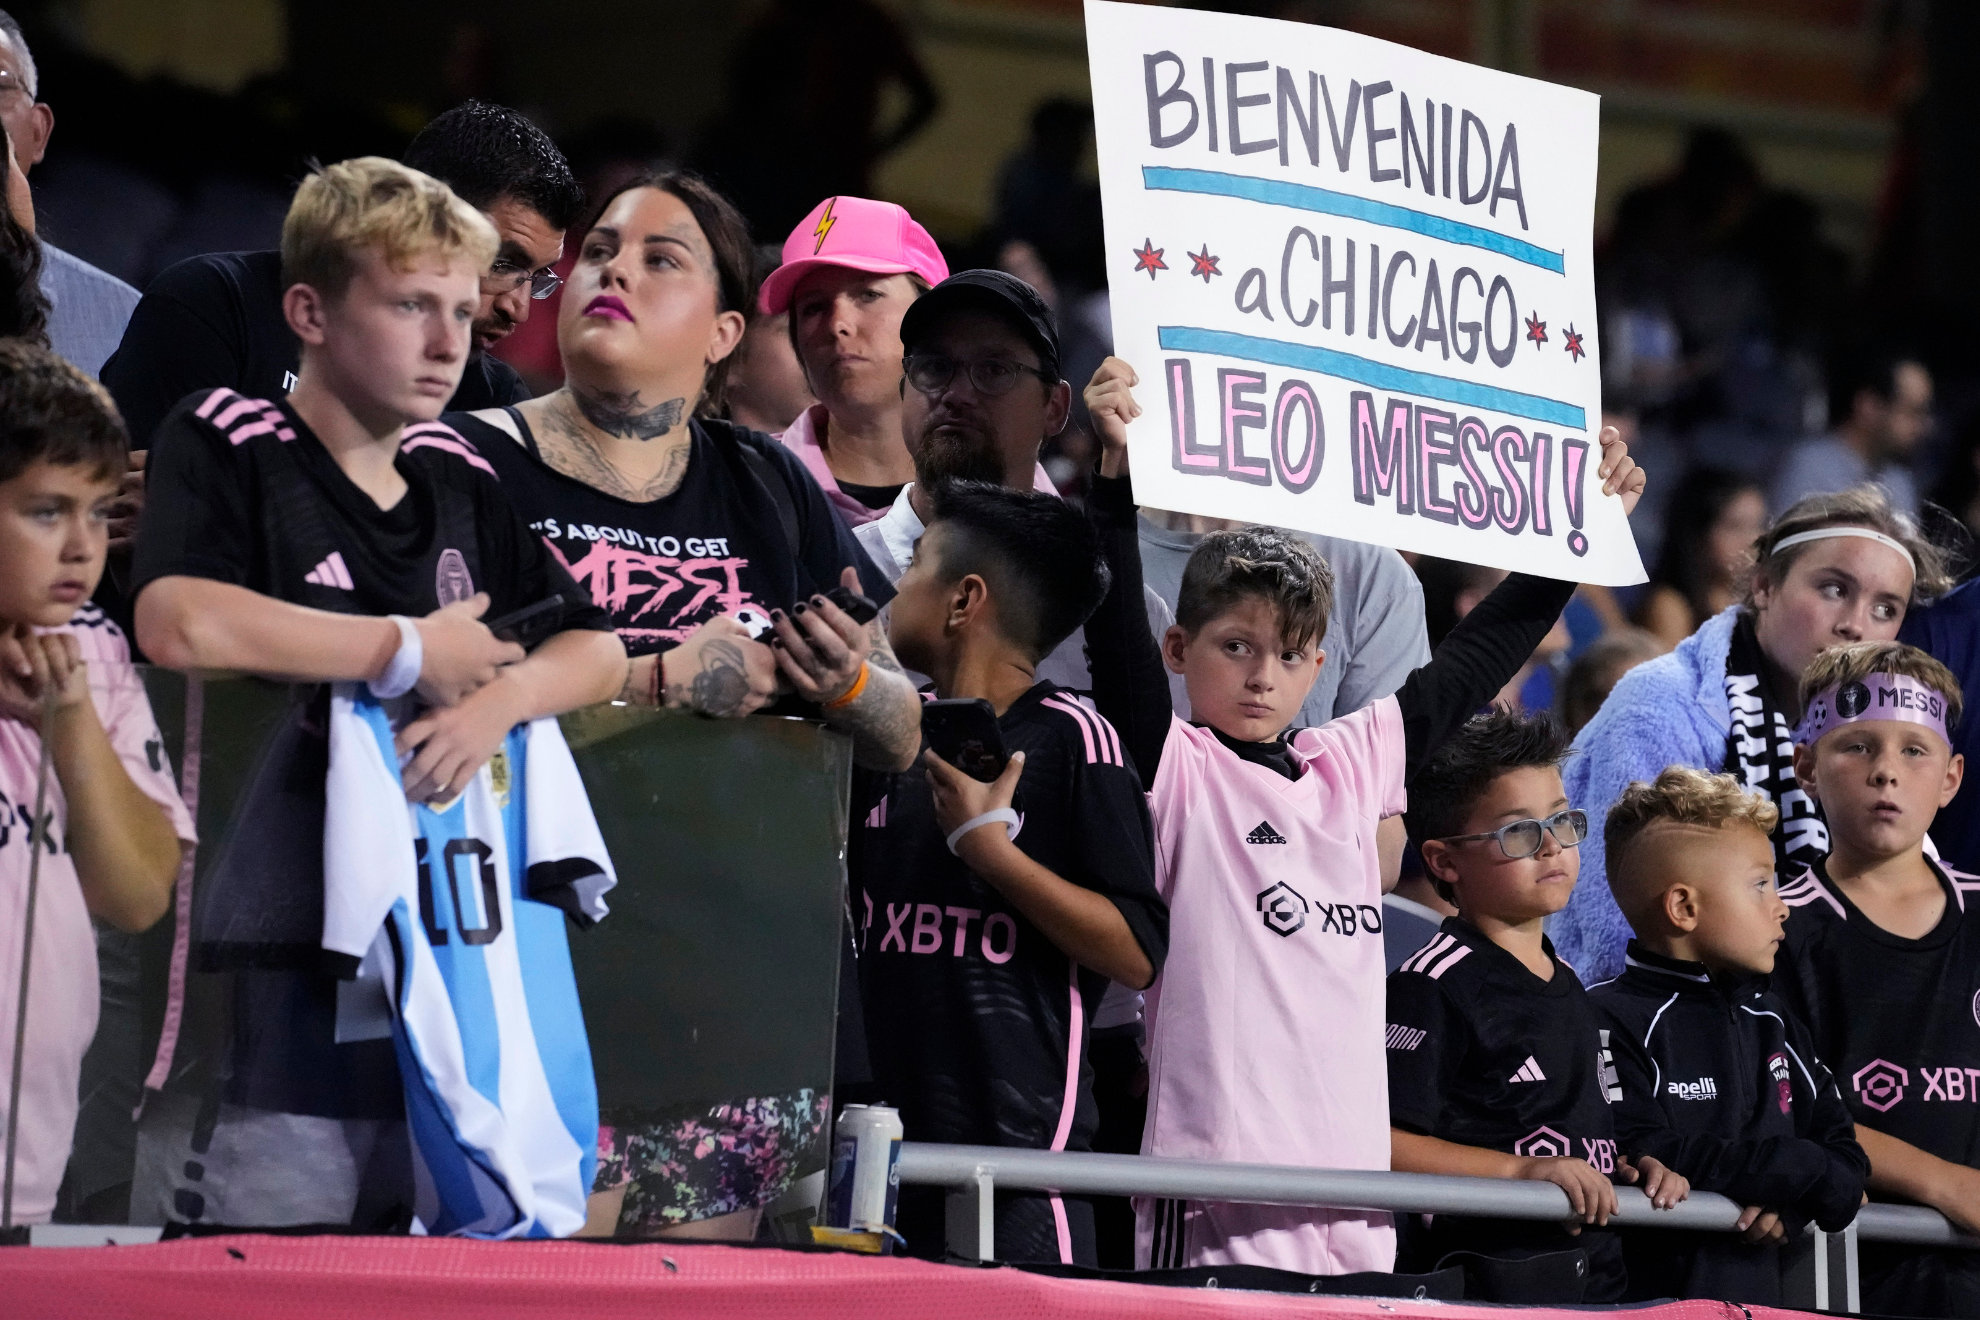 Messi fans didn't get a chance to see him against the Chicago Fire.